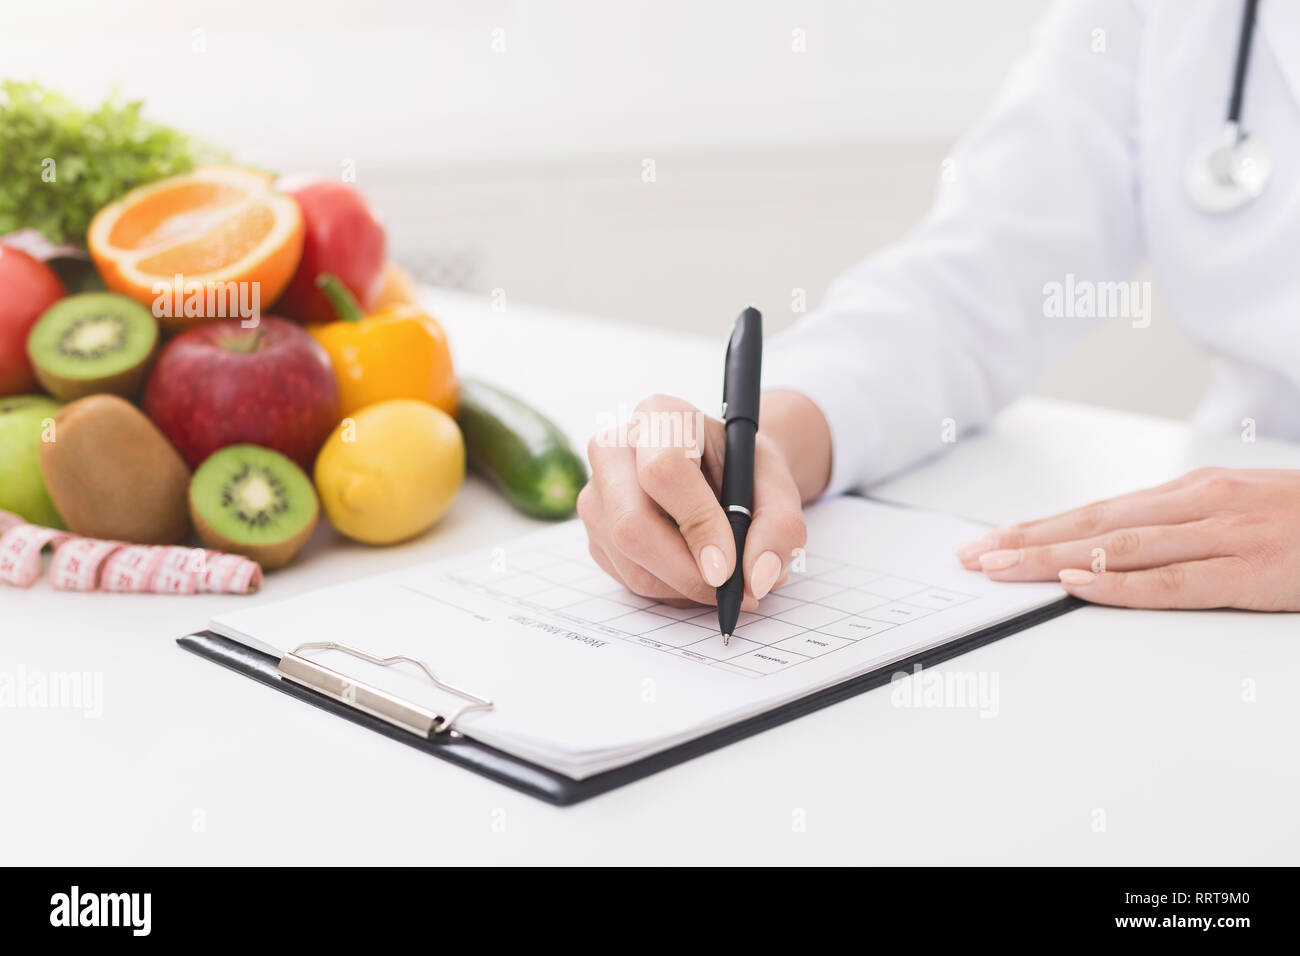 Female nutritionist doctor writing vegetable diet plan Stock Photo